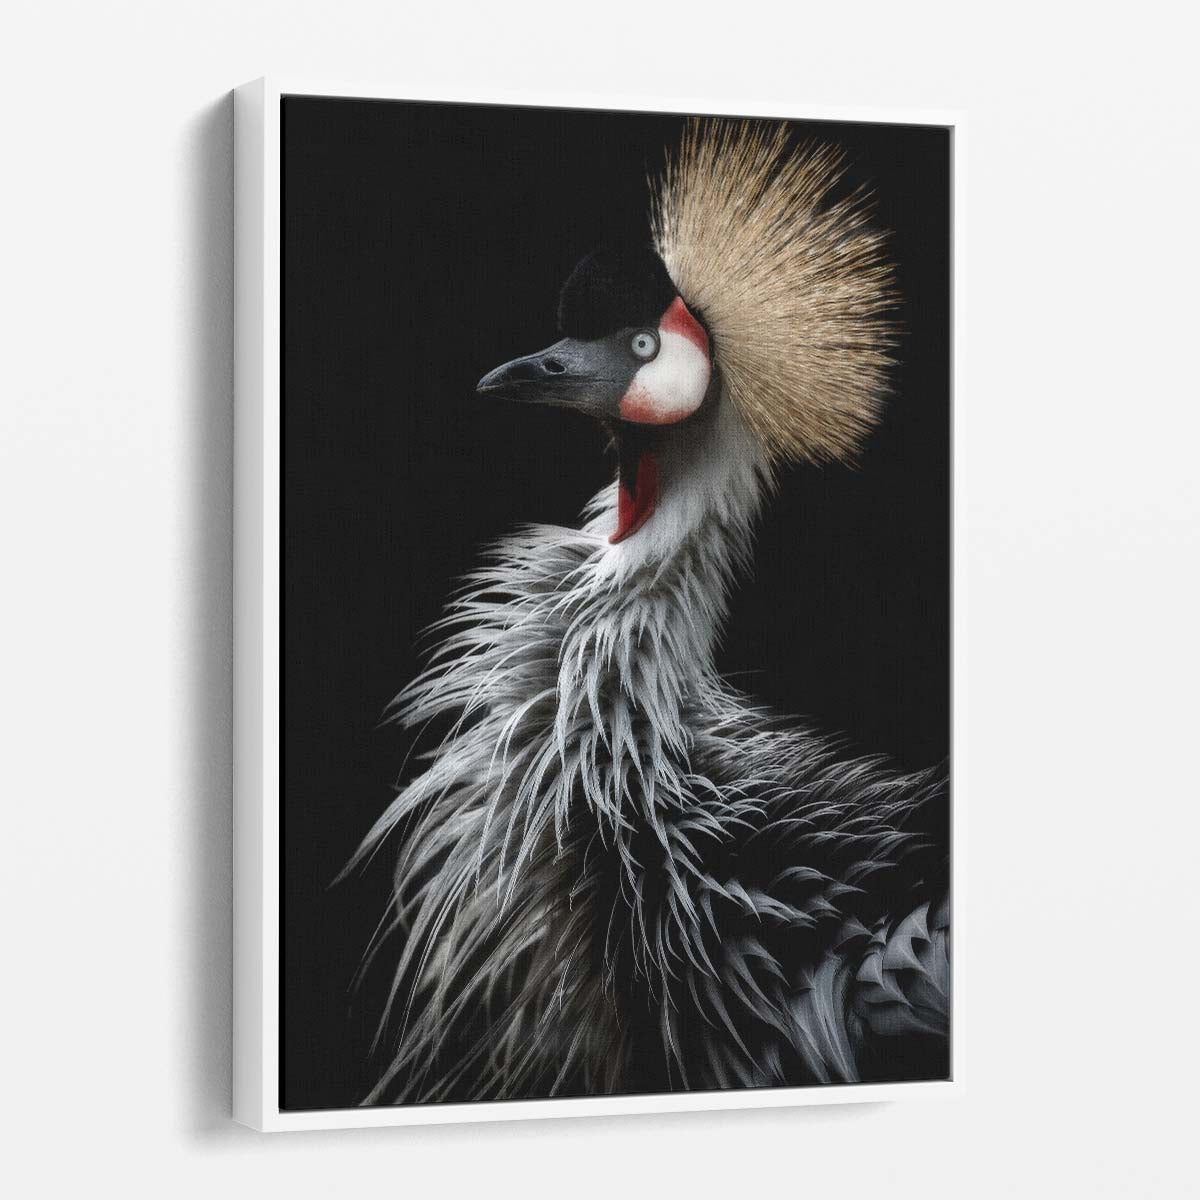 Minimalist Monochrome Crowned Crane Bird Photography Wall Art by Luxuriance Designs, made in USA